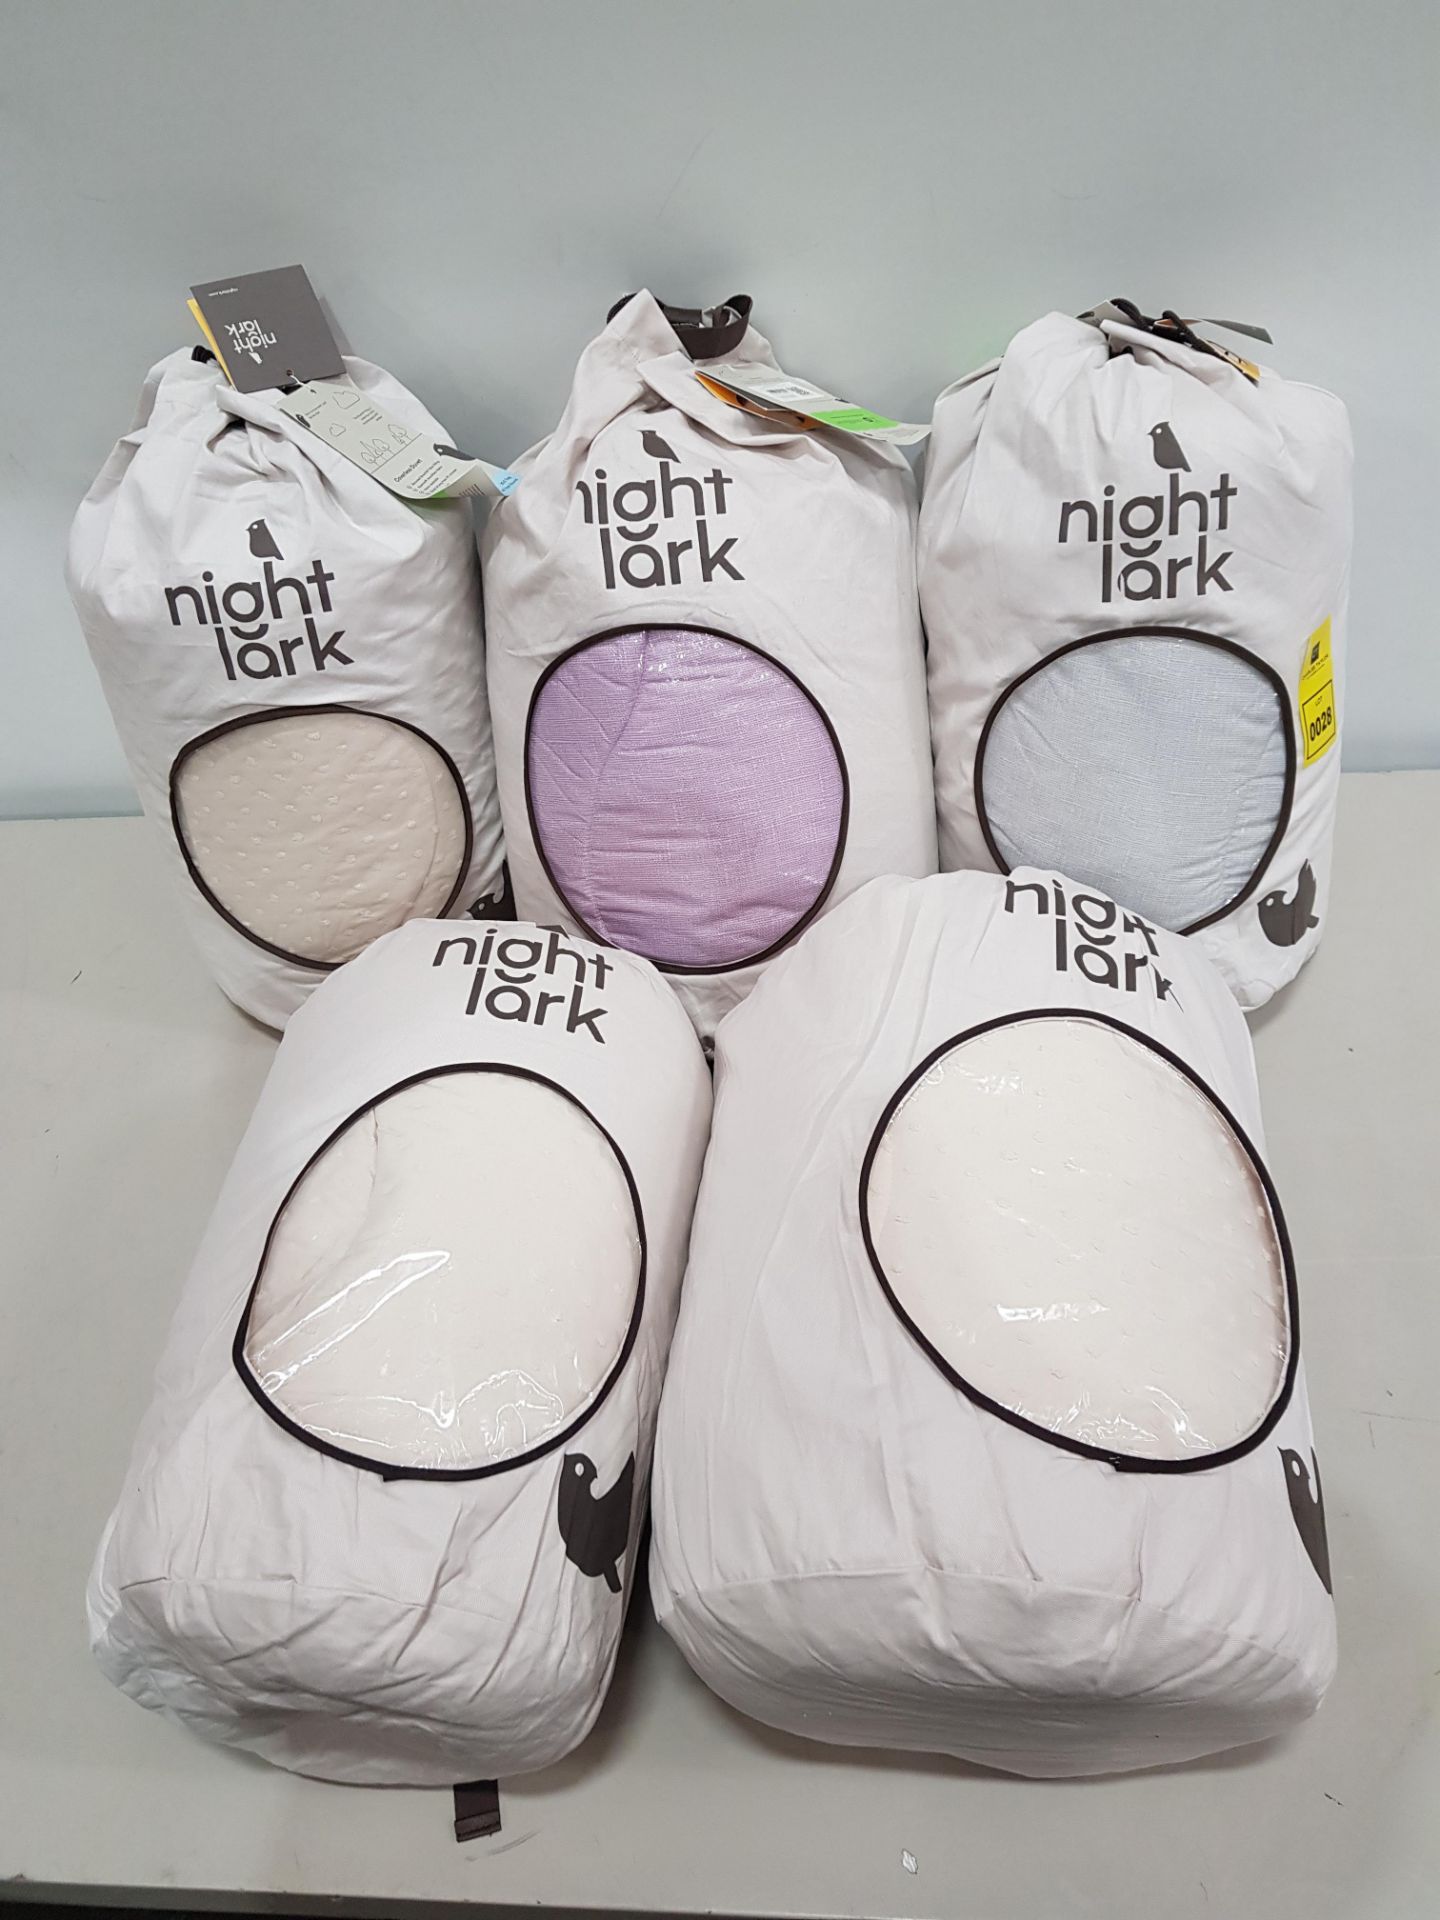 5 X BRAND NEW NIGHT LARK COVERLESS DUVET'S 2 SIZE KING 10.5 TOG 1 IN WARM SAND AND 1 LILAC BLOOM,